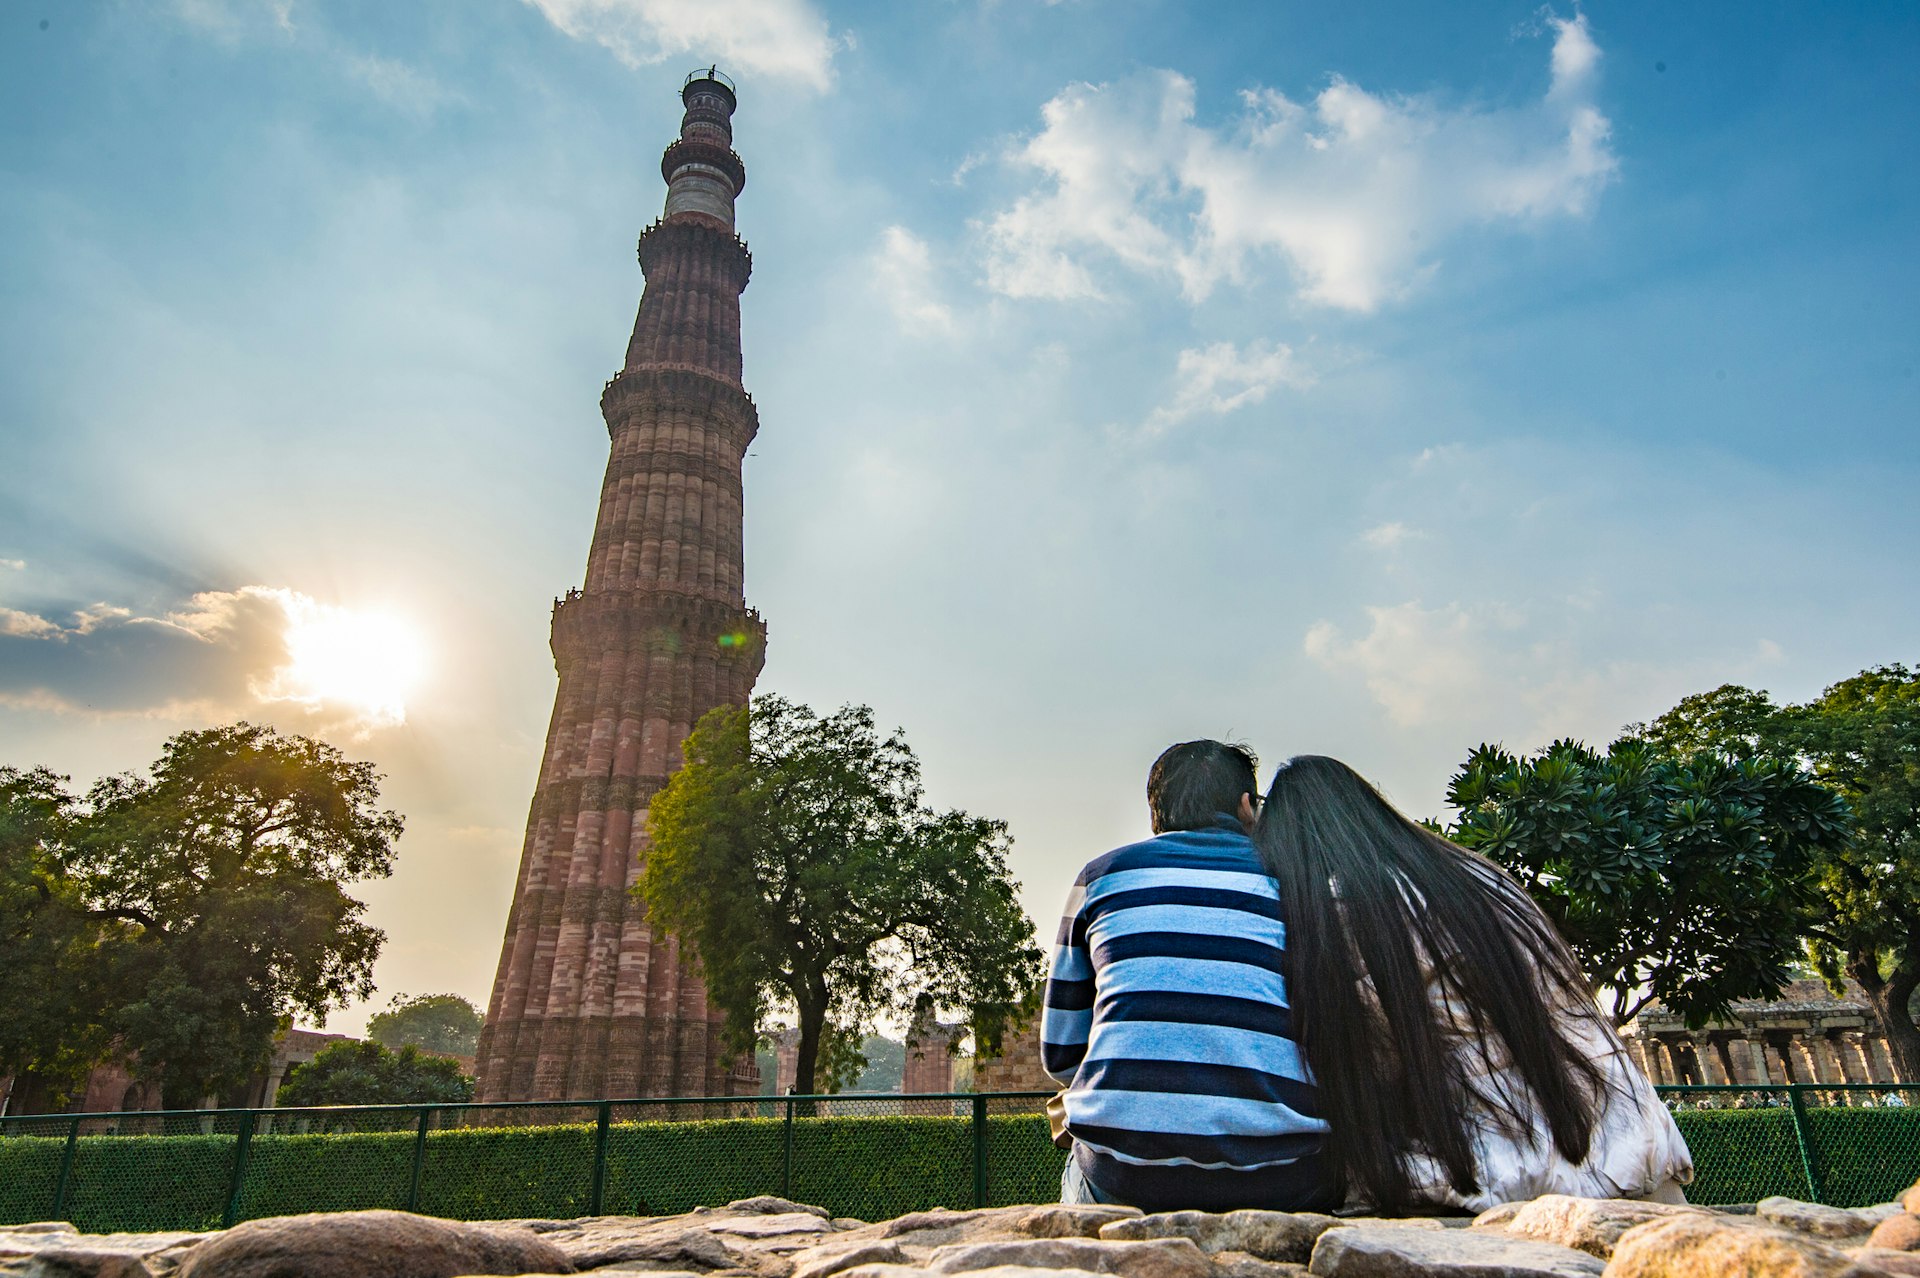 A couple is seen sitting and taking in the sights of the Qutub Minar as the sun sets. The Qutub complex is located in New Delhi, India.